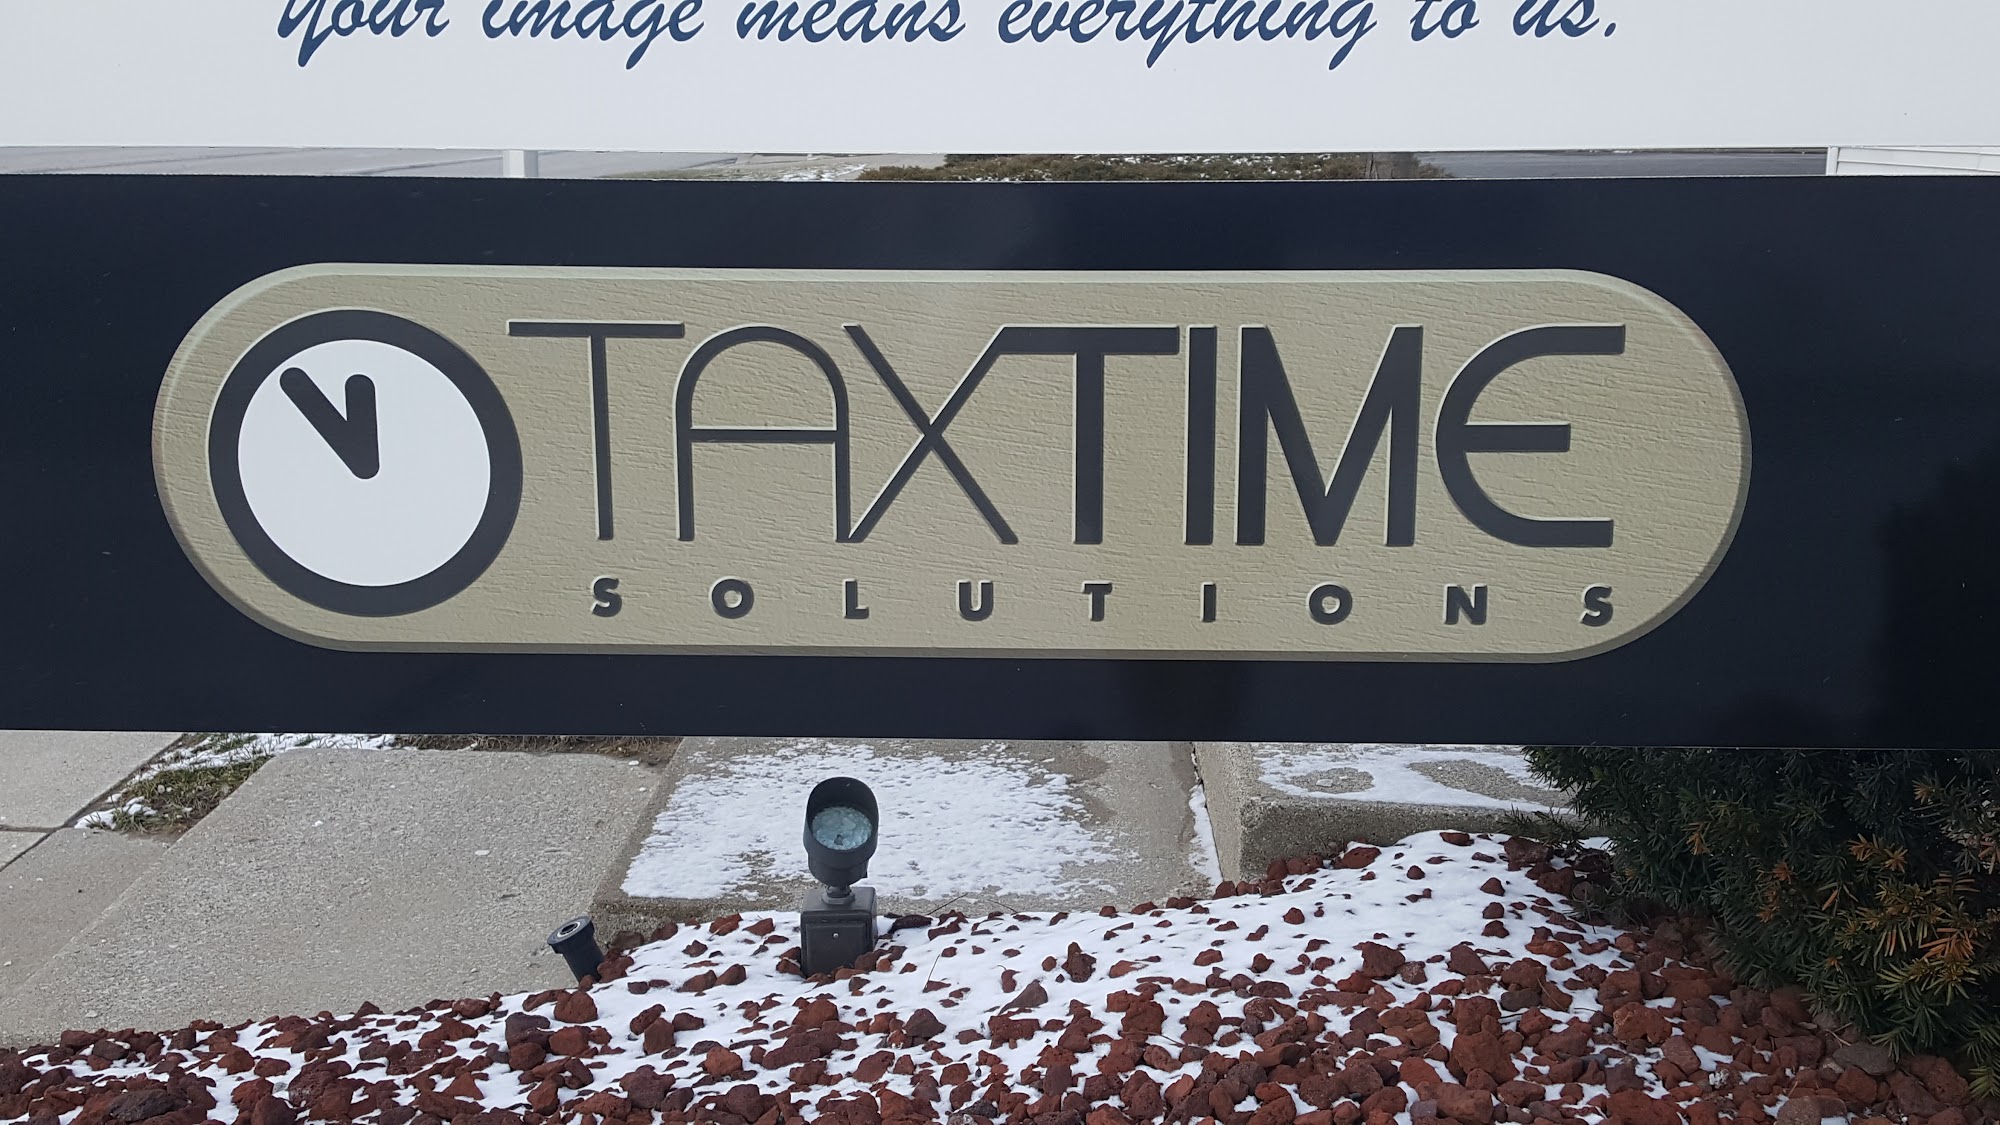 Tax Time Solutions 1651 S Milford Rd # 105, Highland Michigan 48357